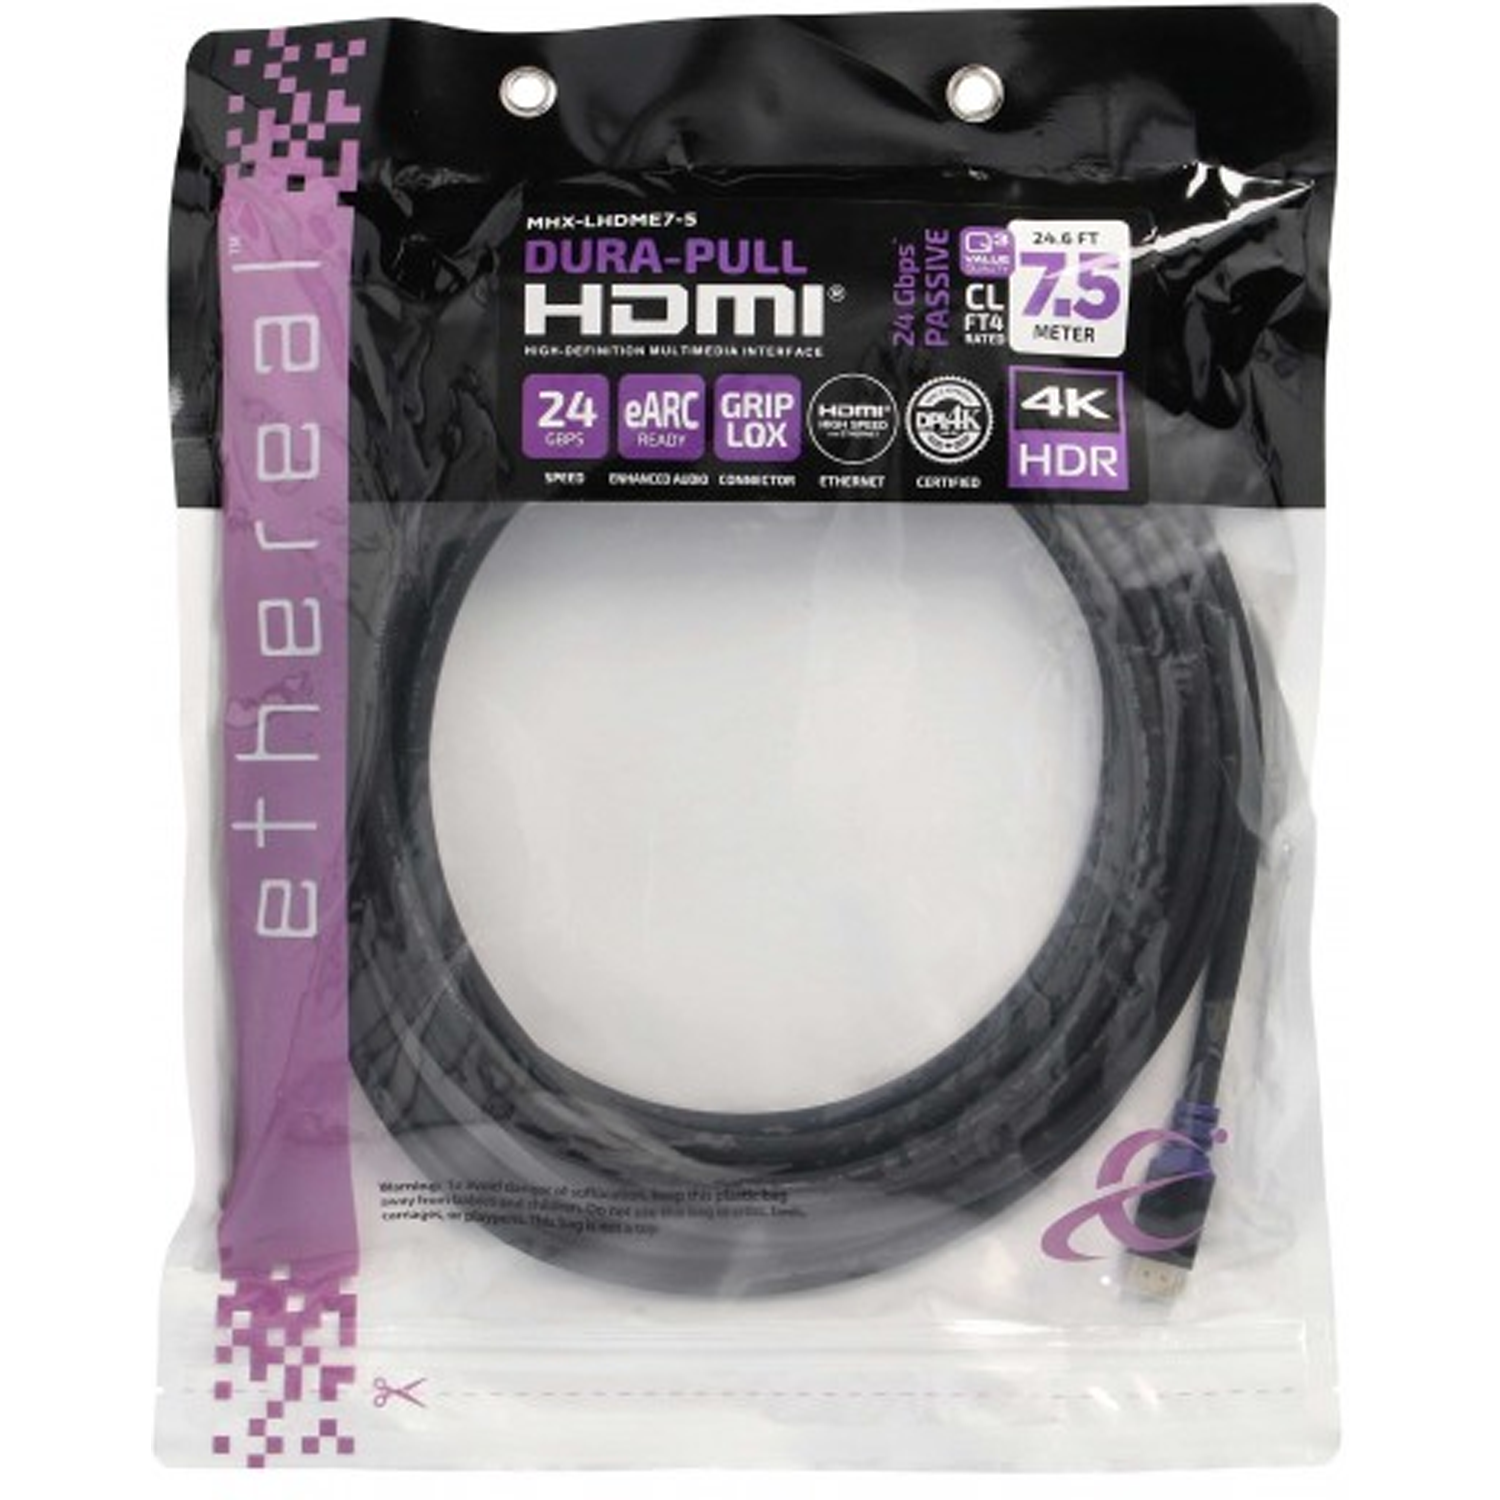 ETHEREAL DPL certified 24gbs 24' HDMI Cable 8k 4:4:4 HDR, eARC and ARC